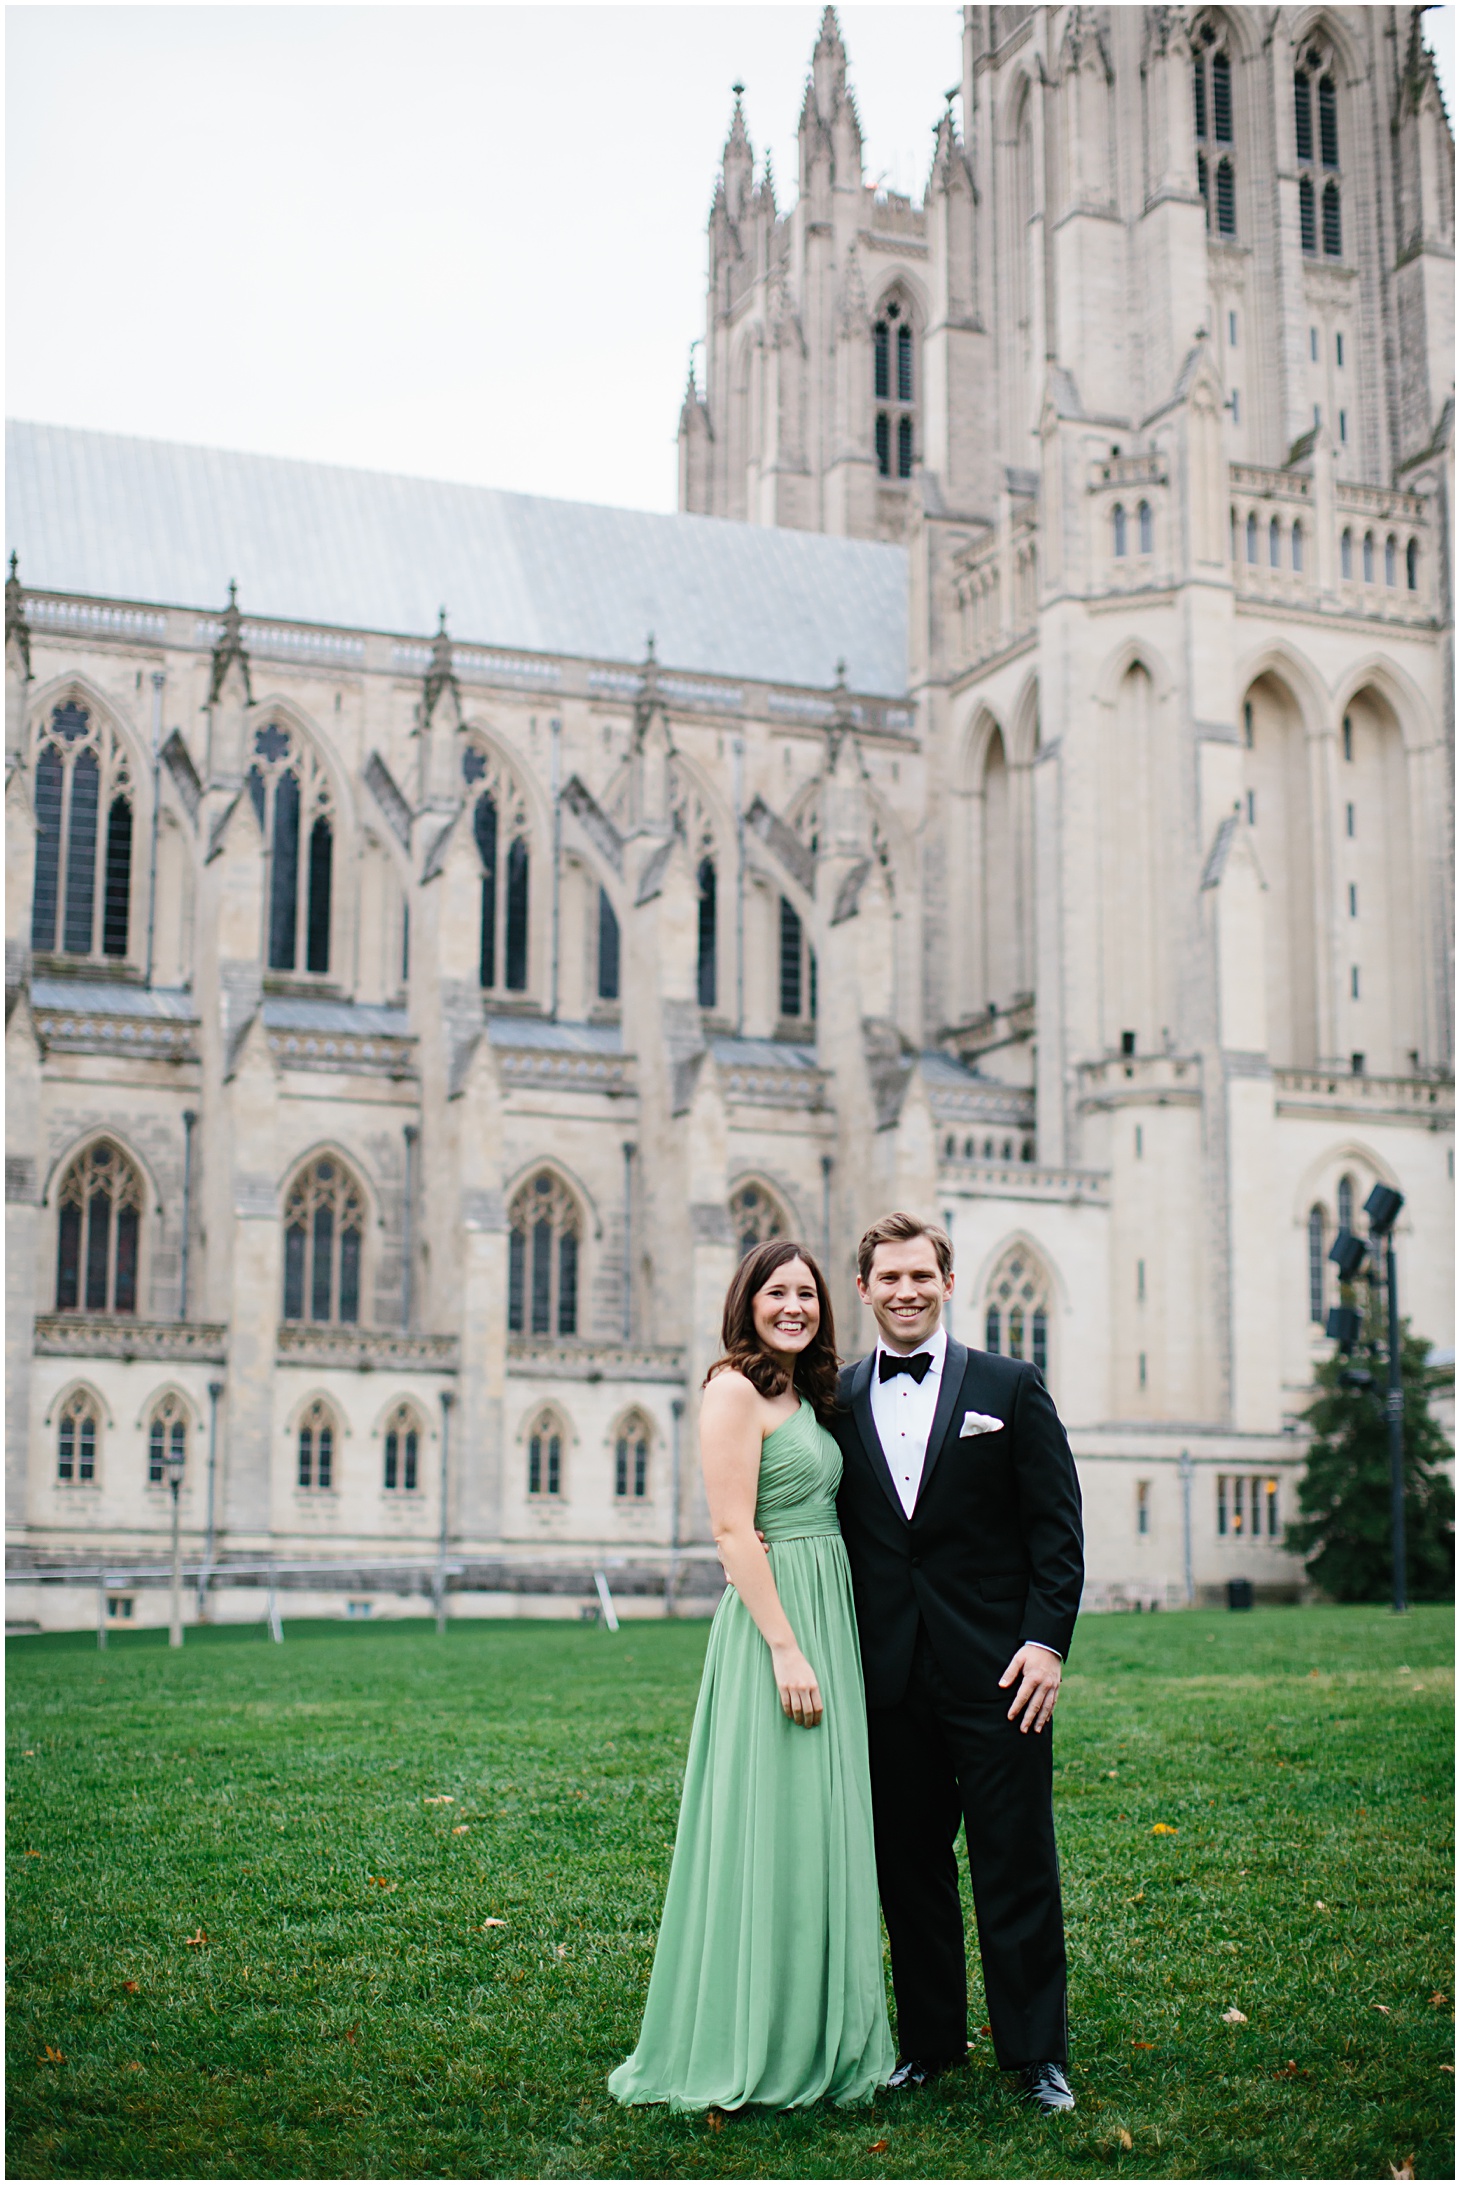 2015 - 2016 Best of Engagements by Sarah Bradshaw Photography in Washington DC